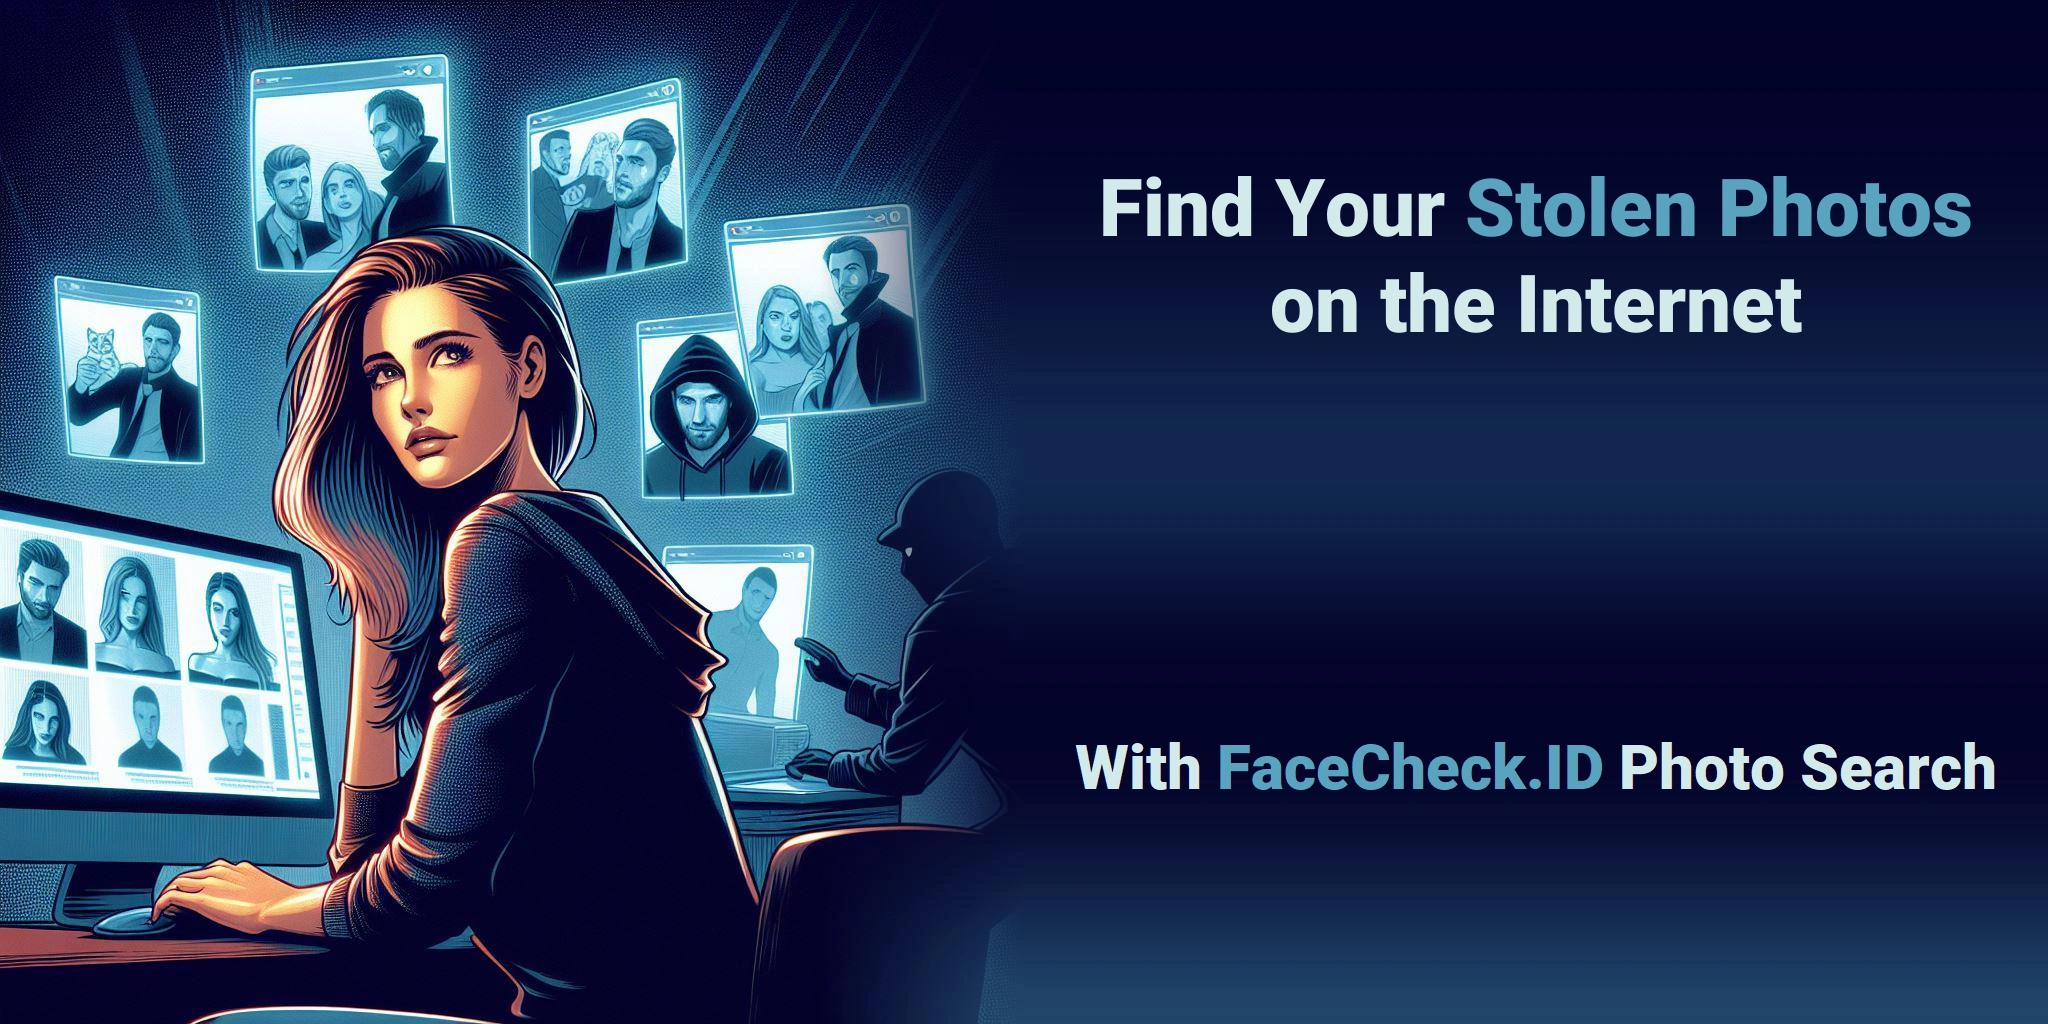 Find Your Stolen Photos on the Internet With FaceCheck.ID Photo Search